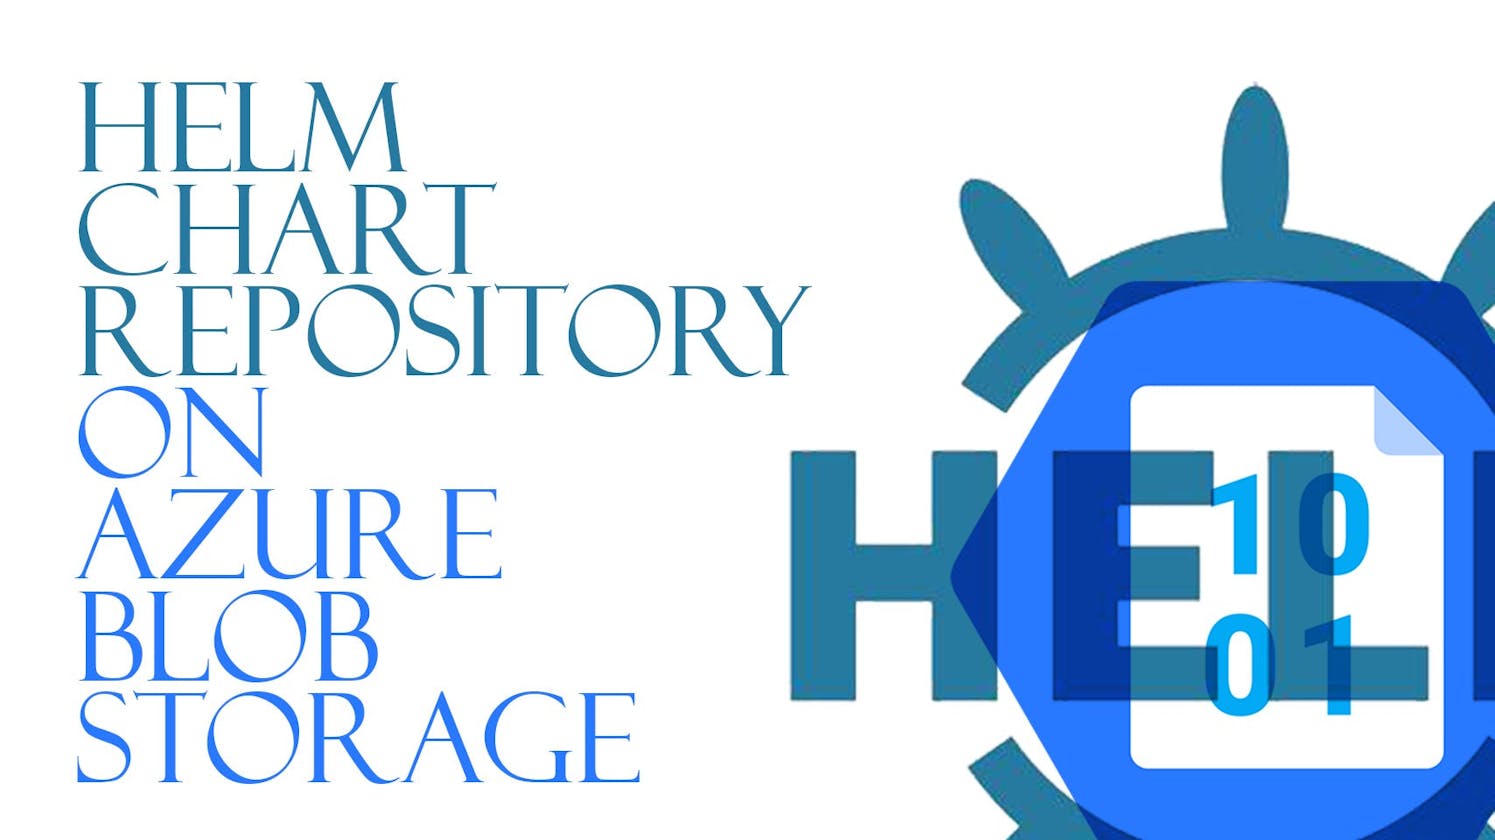 Step-by-Step Guide to Hosting a Helm Chart Repository on Azure Blob Storage